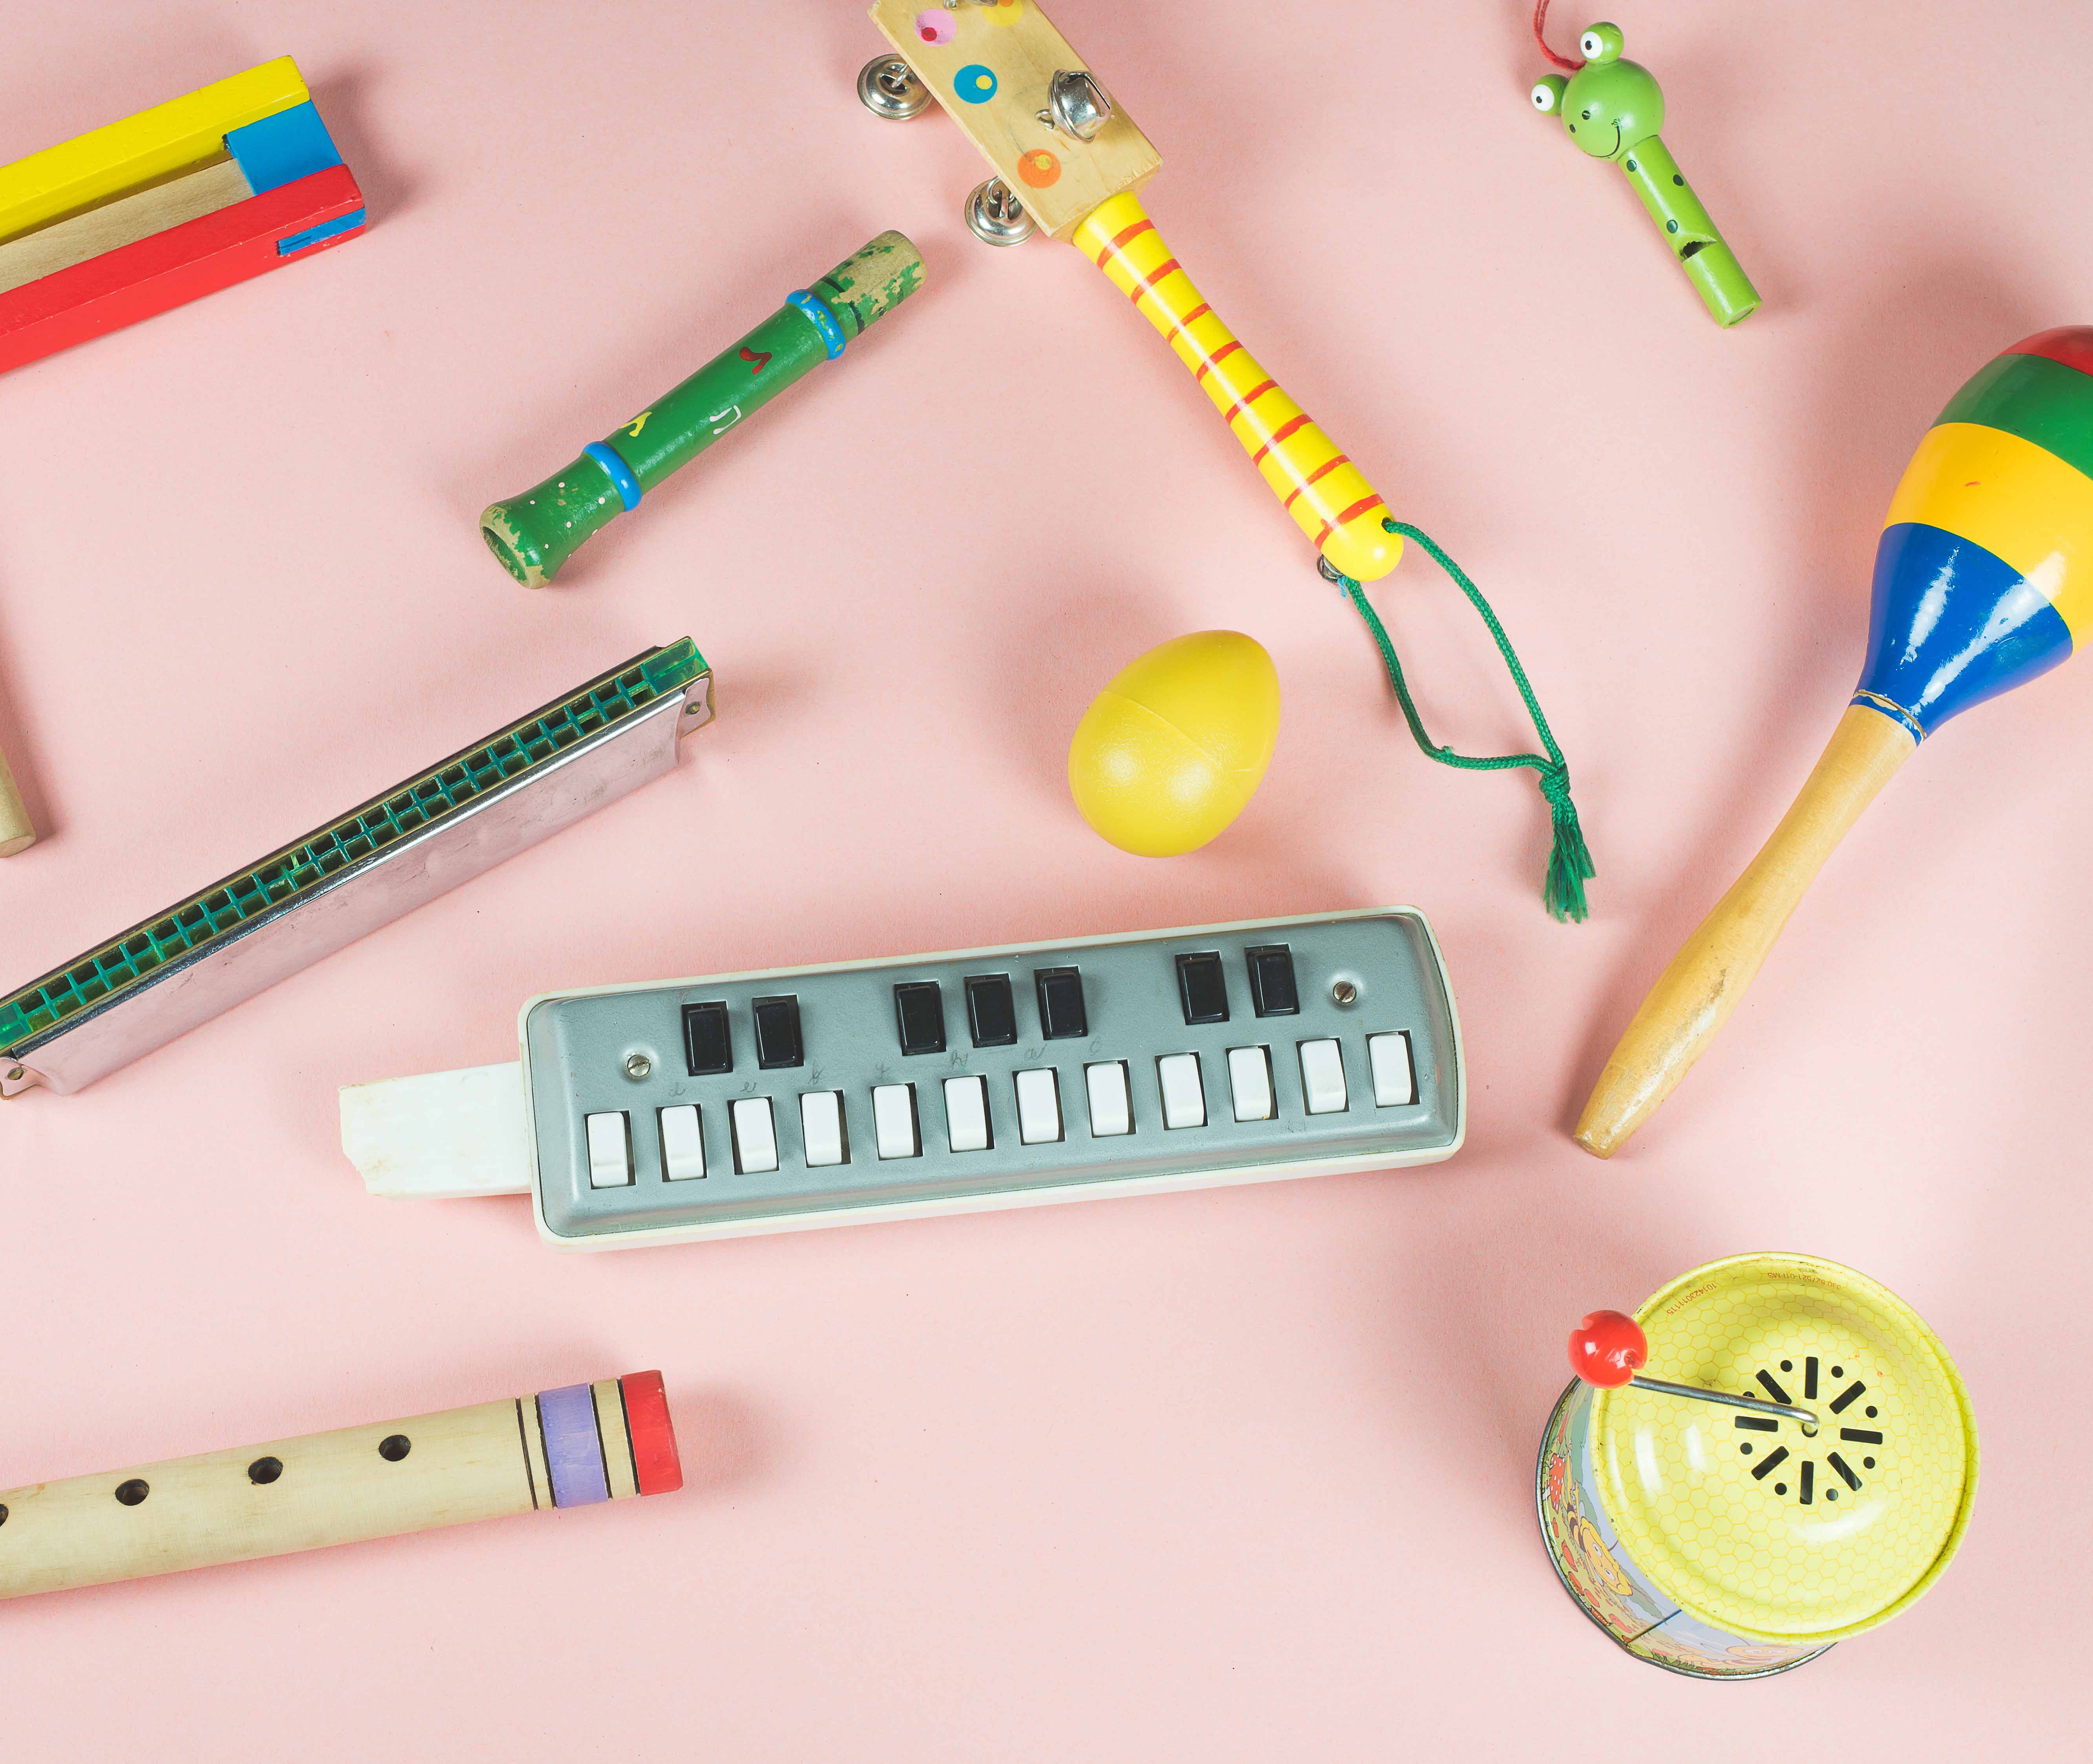 An assortment of musical instruments on a pastel pink background